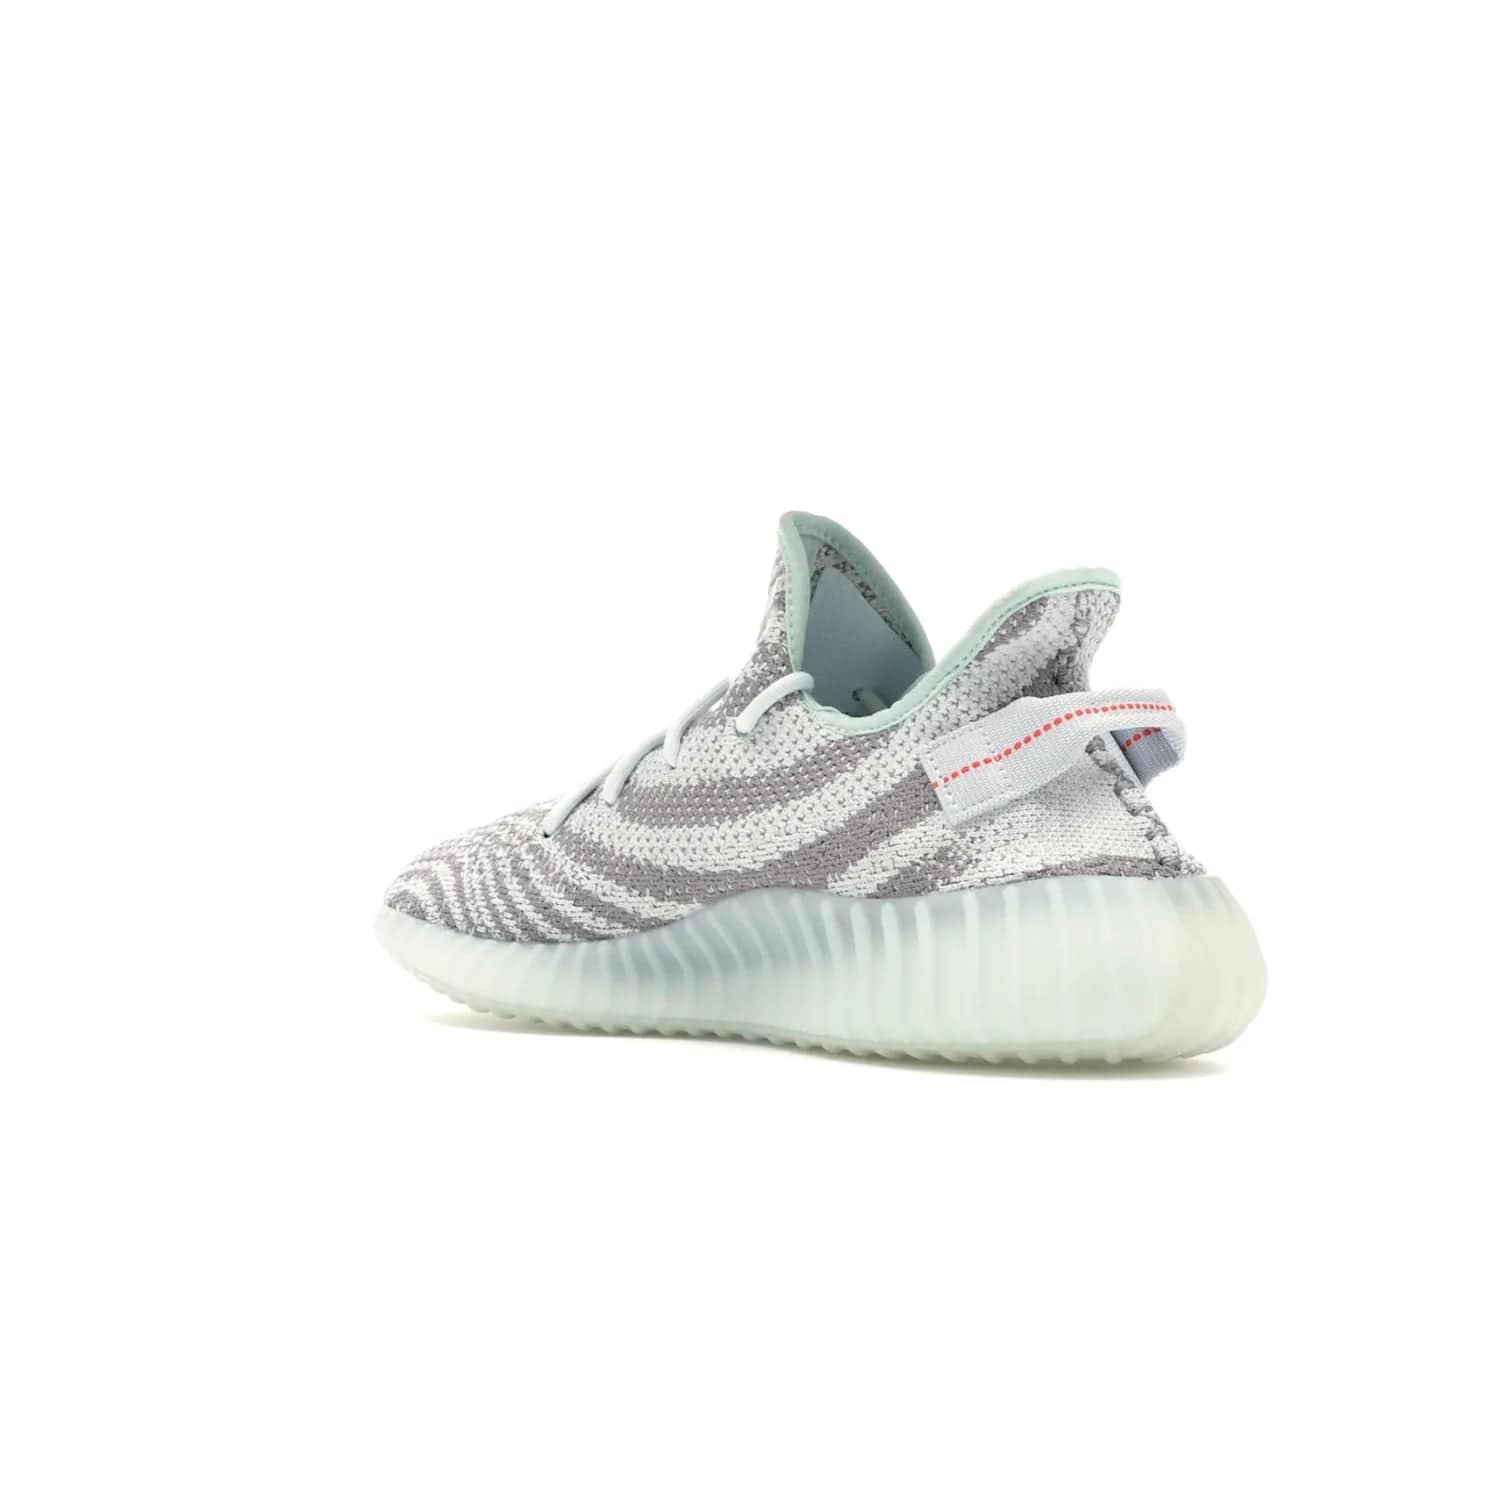 adidas Yeezy Boost 350 V2 Blue Tint - Image 24 - Only at www.BallersClubKickz.com - The adidas Yeezy Boost 350 V2 Blue Tint merges fashion and functionality with its Primeknit upper and Boost sole. Released in December 2017, this luxurious sneaker is perfect for making a stylish statement.